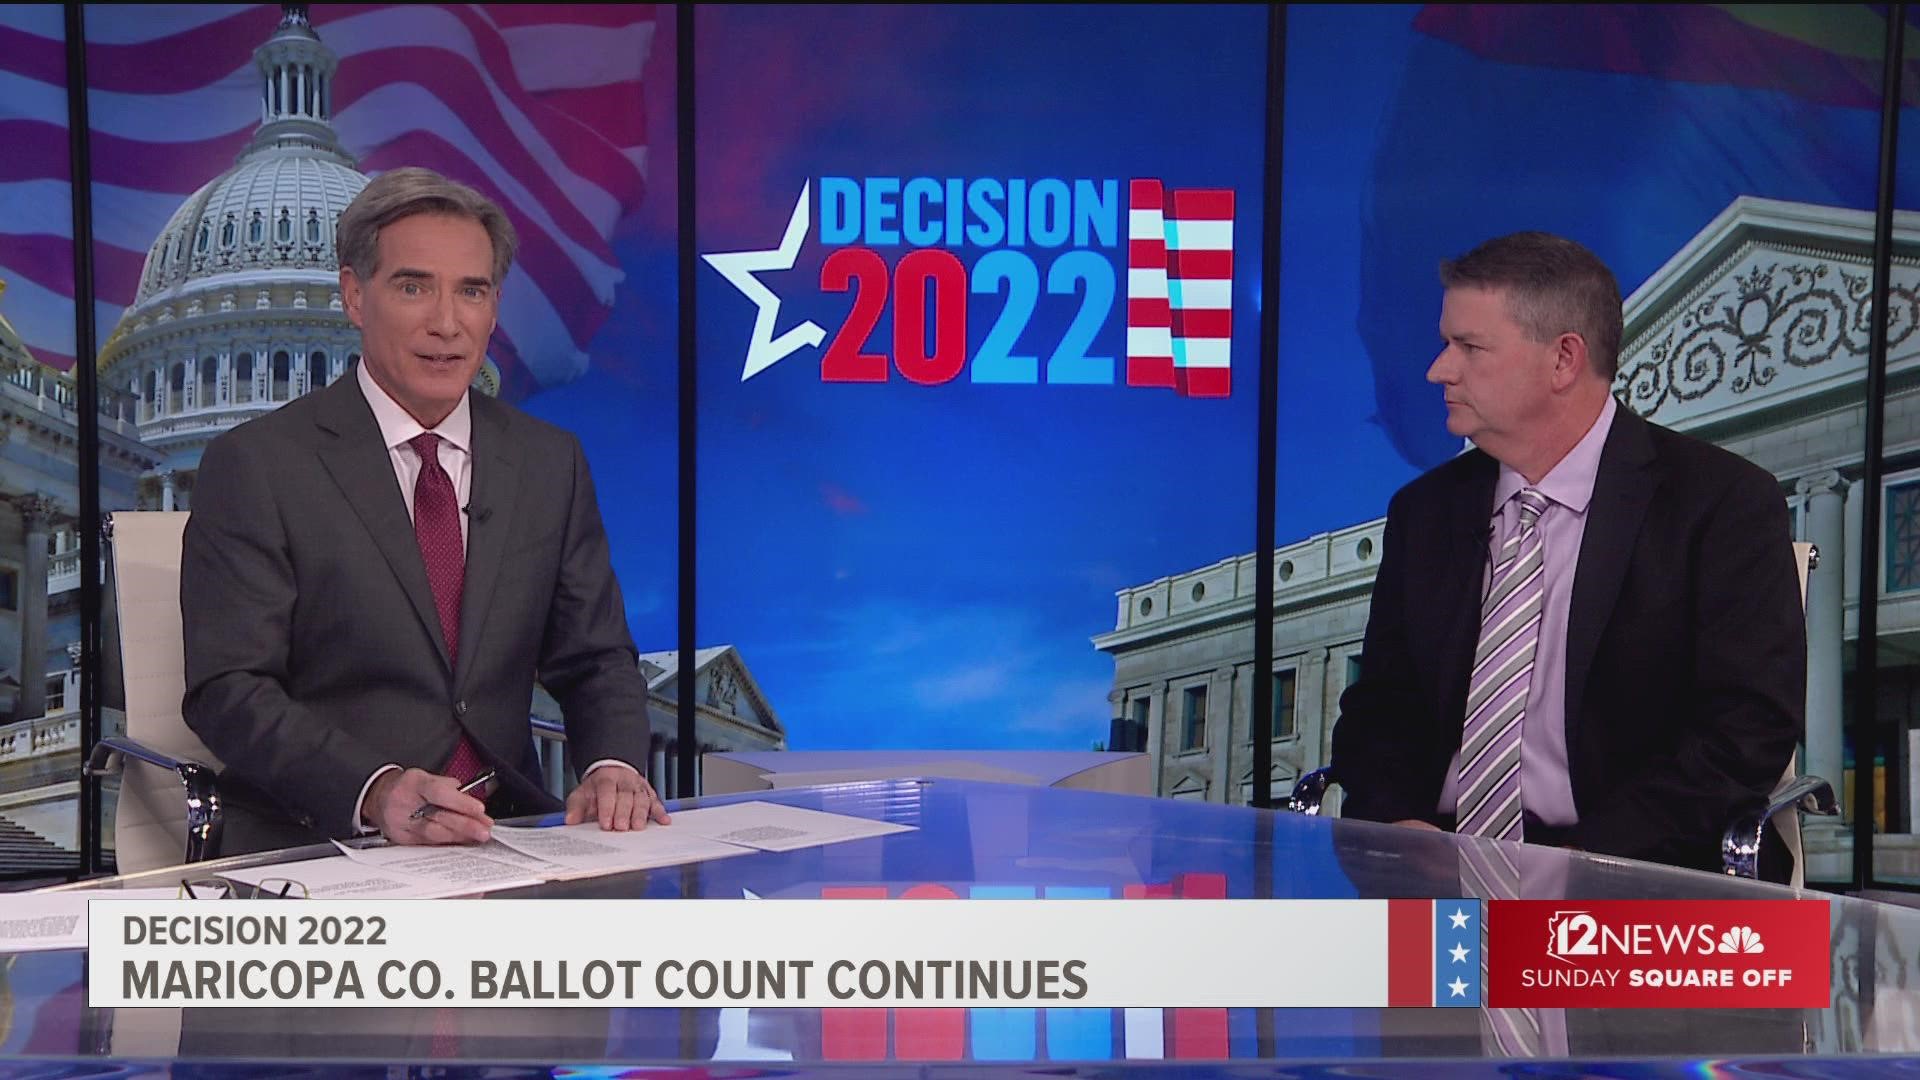 Maricopa County Board Chairman Bill Gates joins "Sunday Square Off' with an update on the county's ballot count.